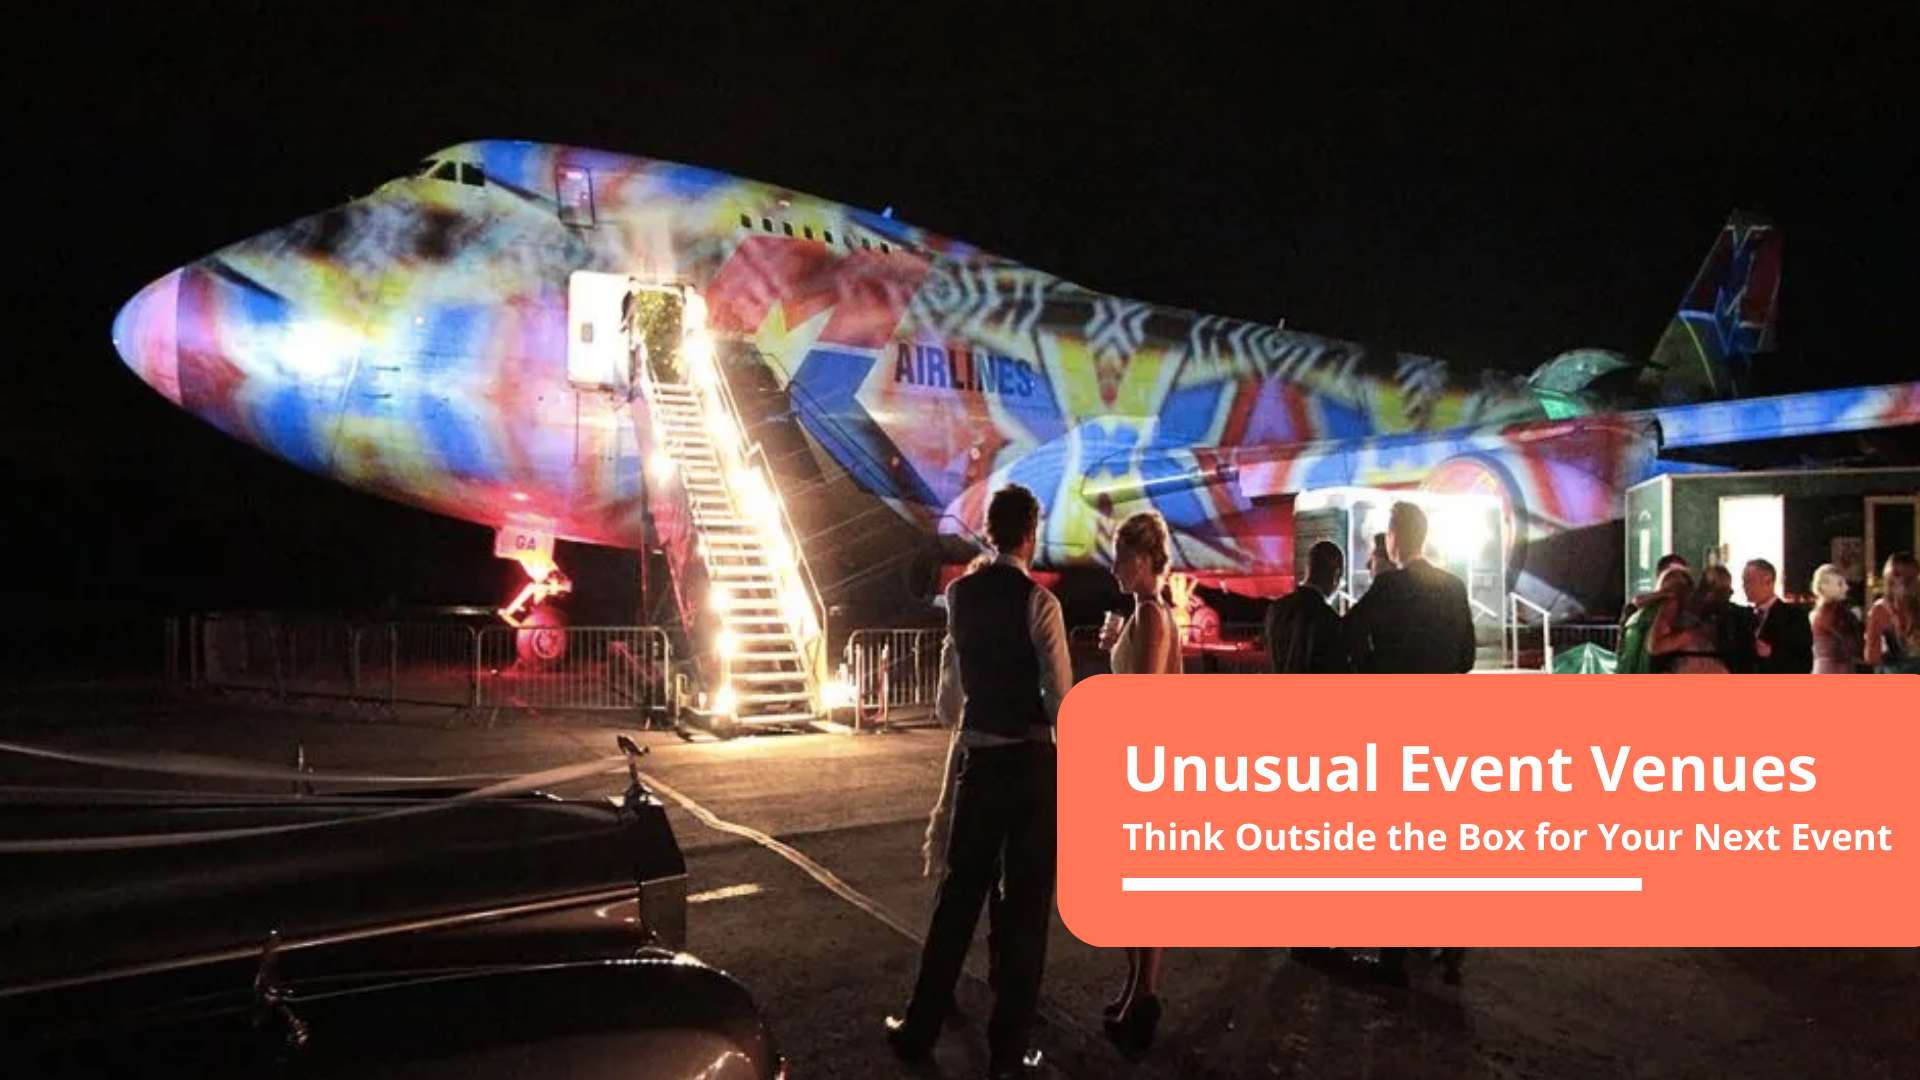 Unusual Event Venues: Think Outside the Box for Your Next Event